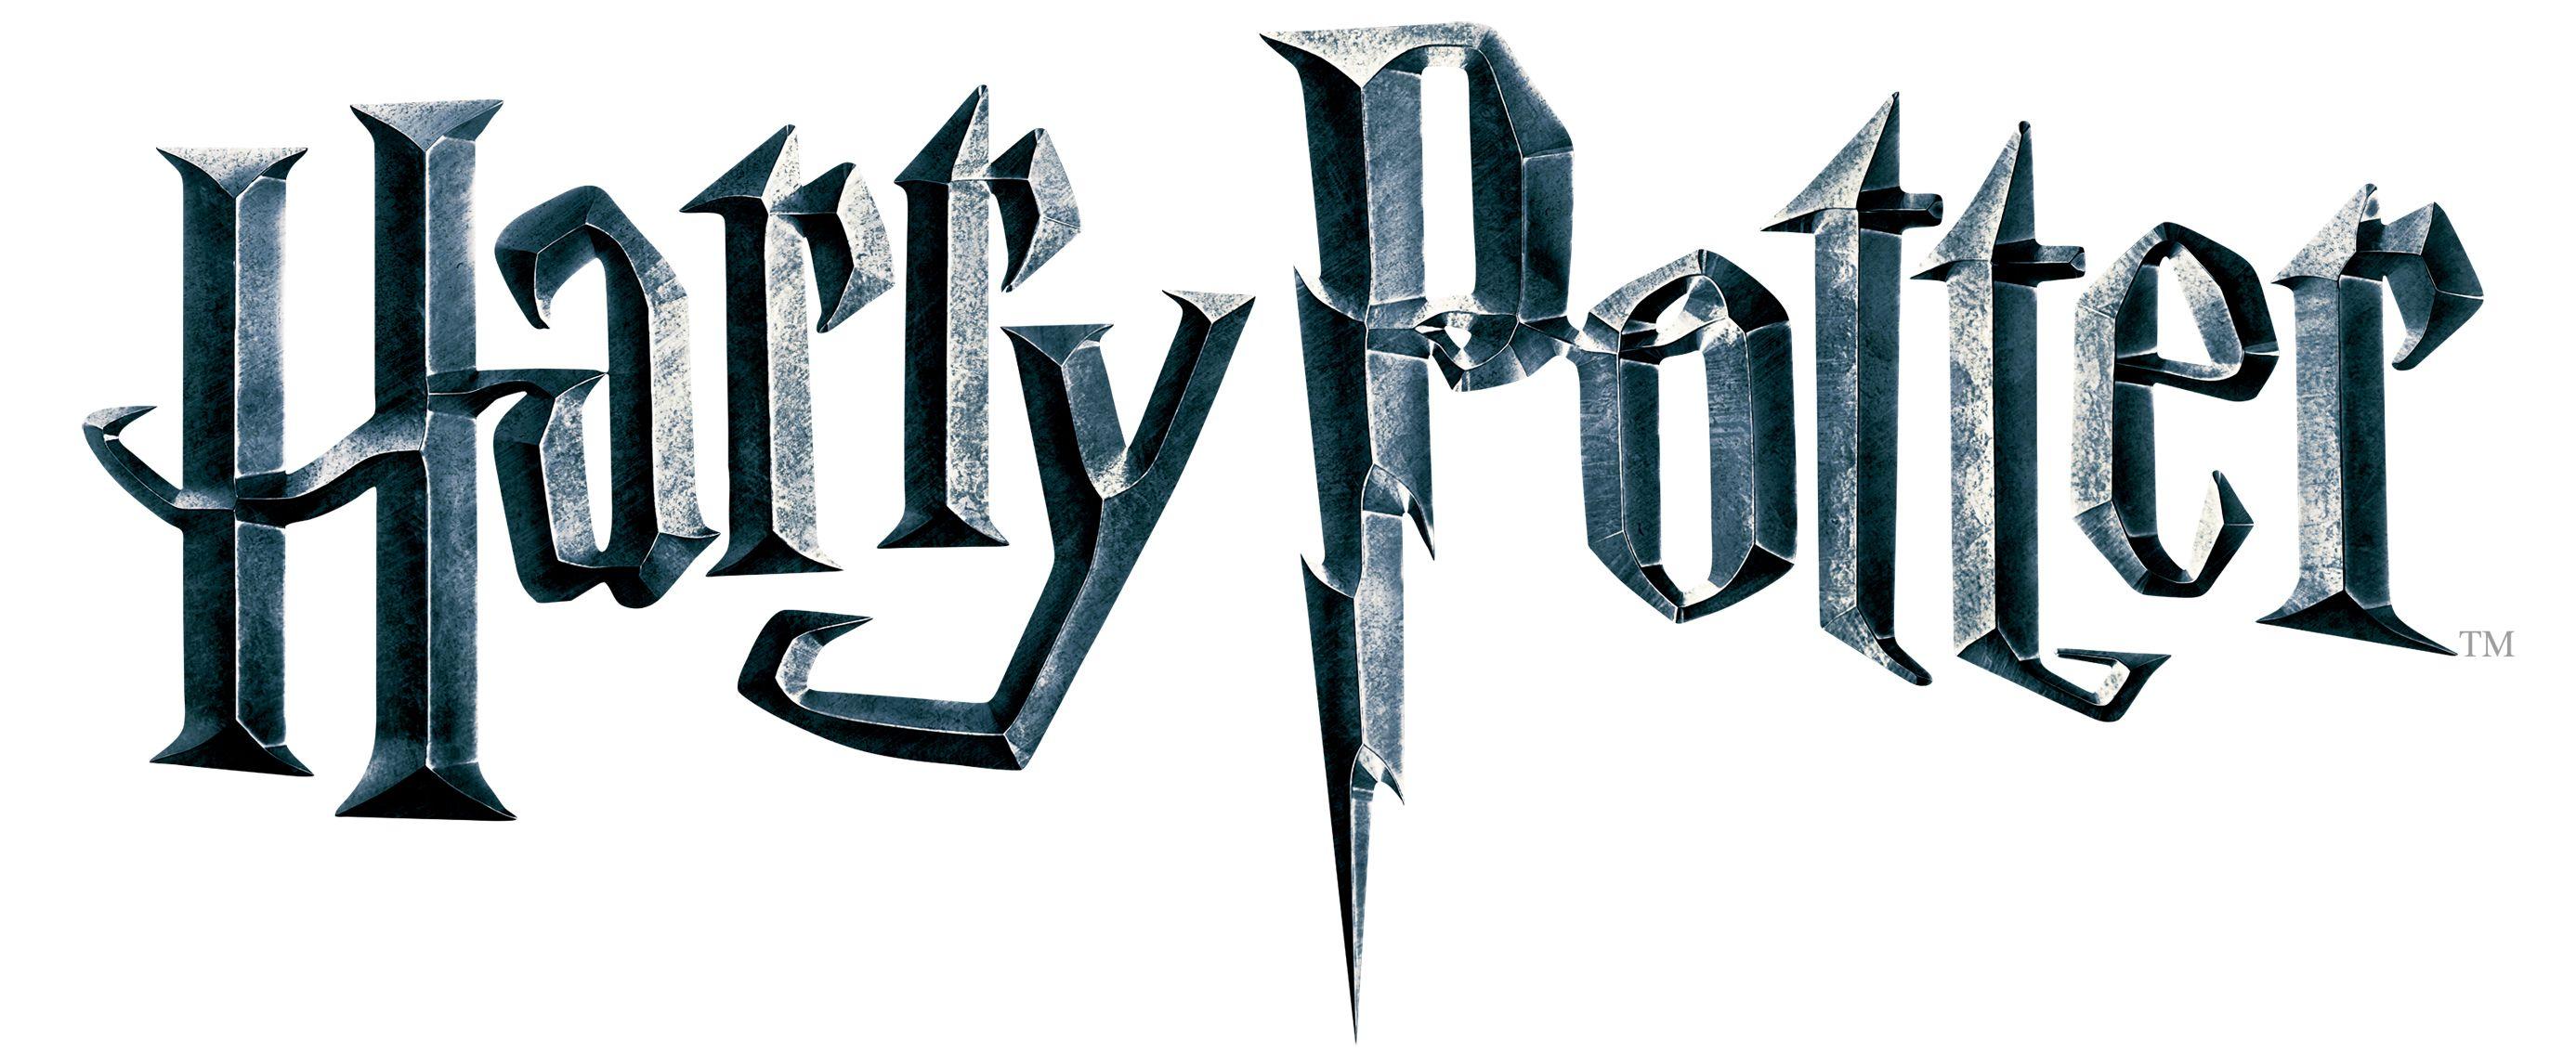 New Harry Potter Logo - Harry Potter Colouring Book - Preview | The Works